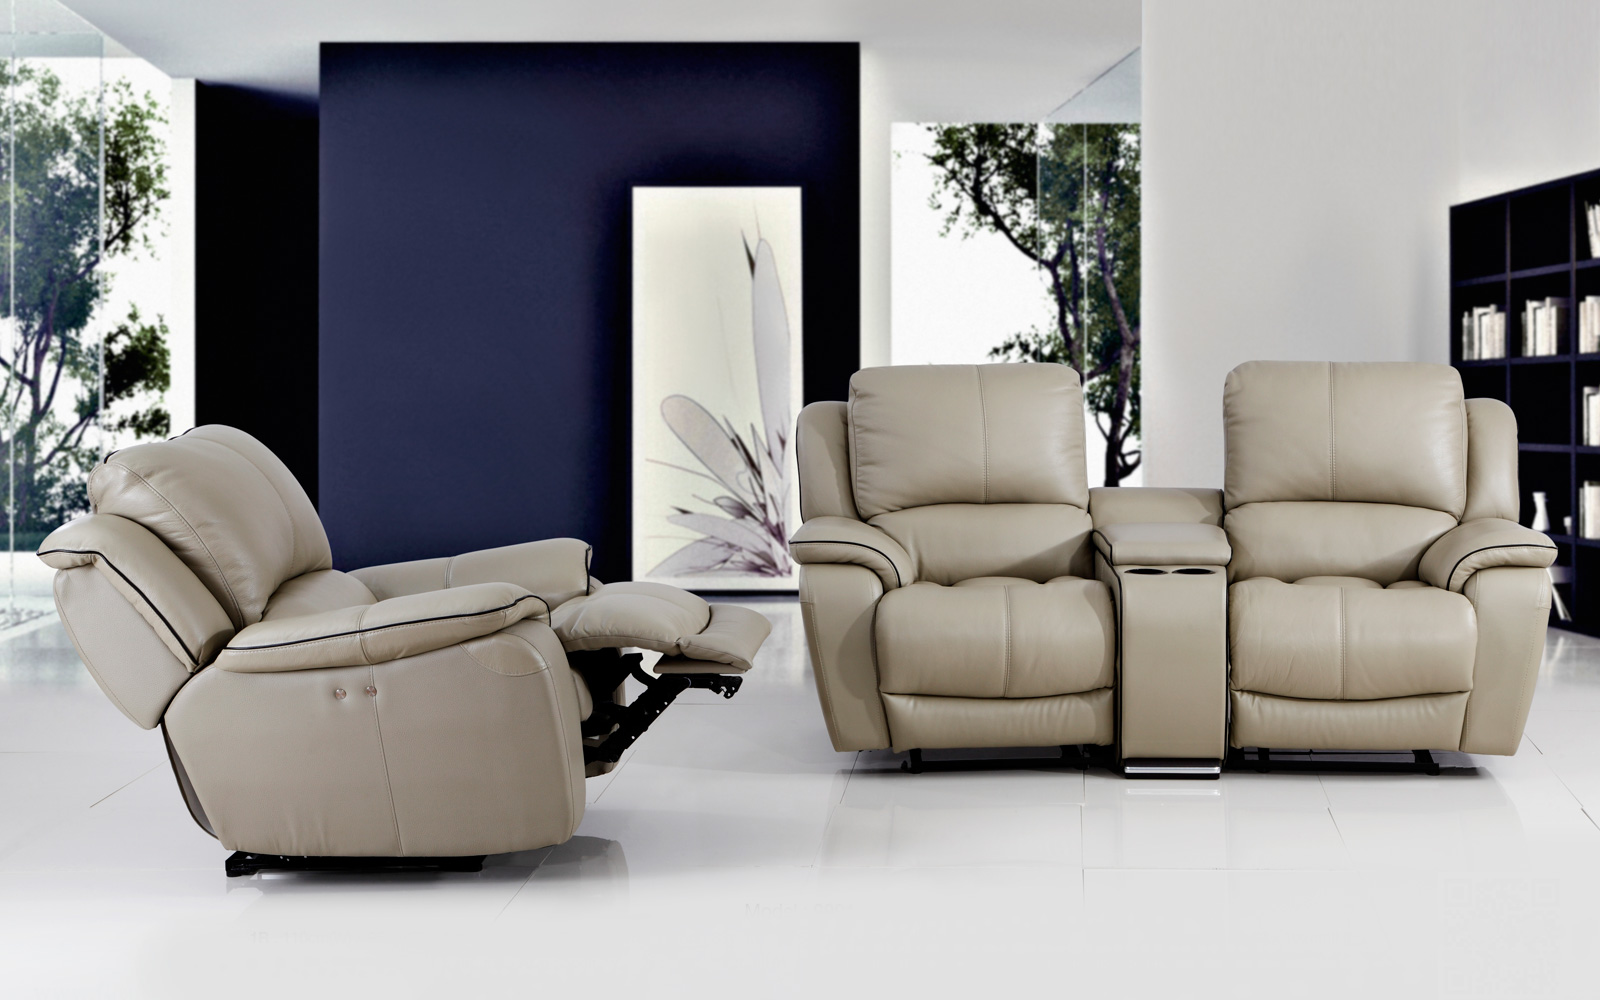 Best 5 Recliner Brands In Malaysia, Best Leather Recliner Brands